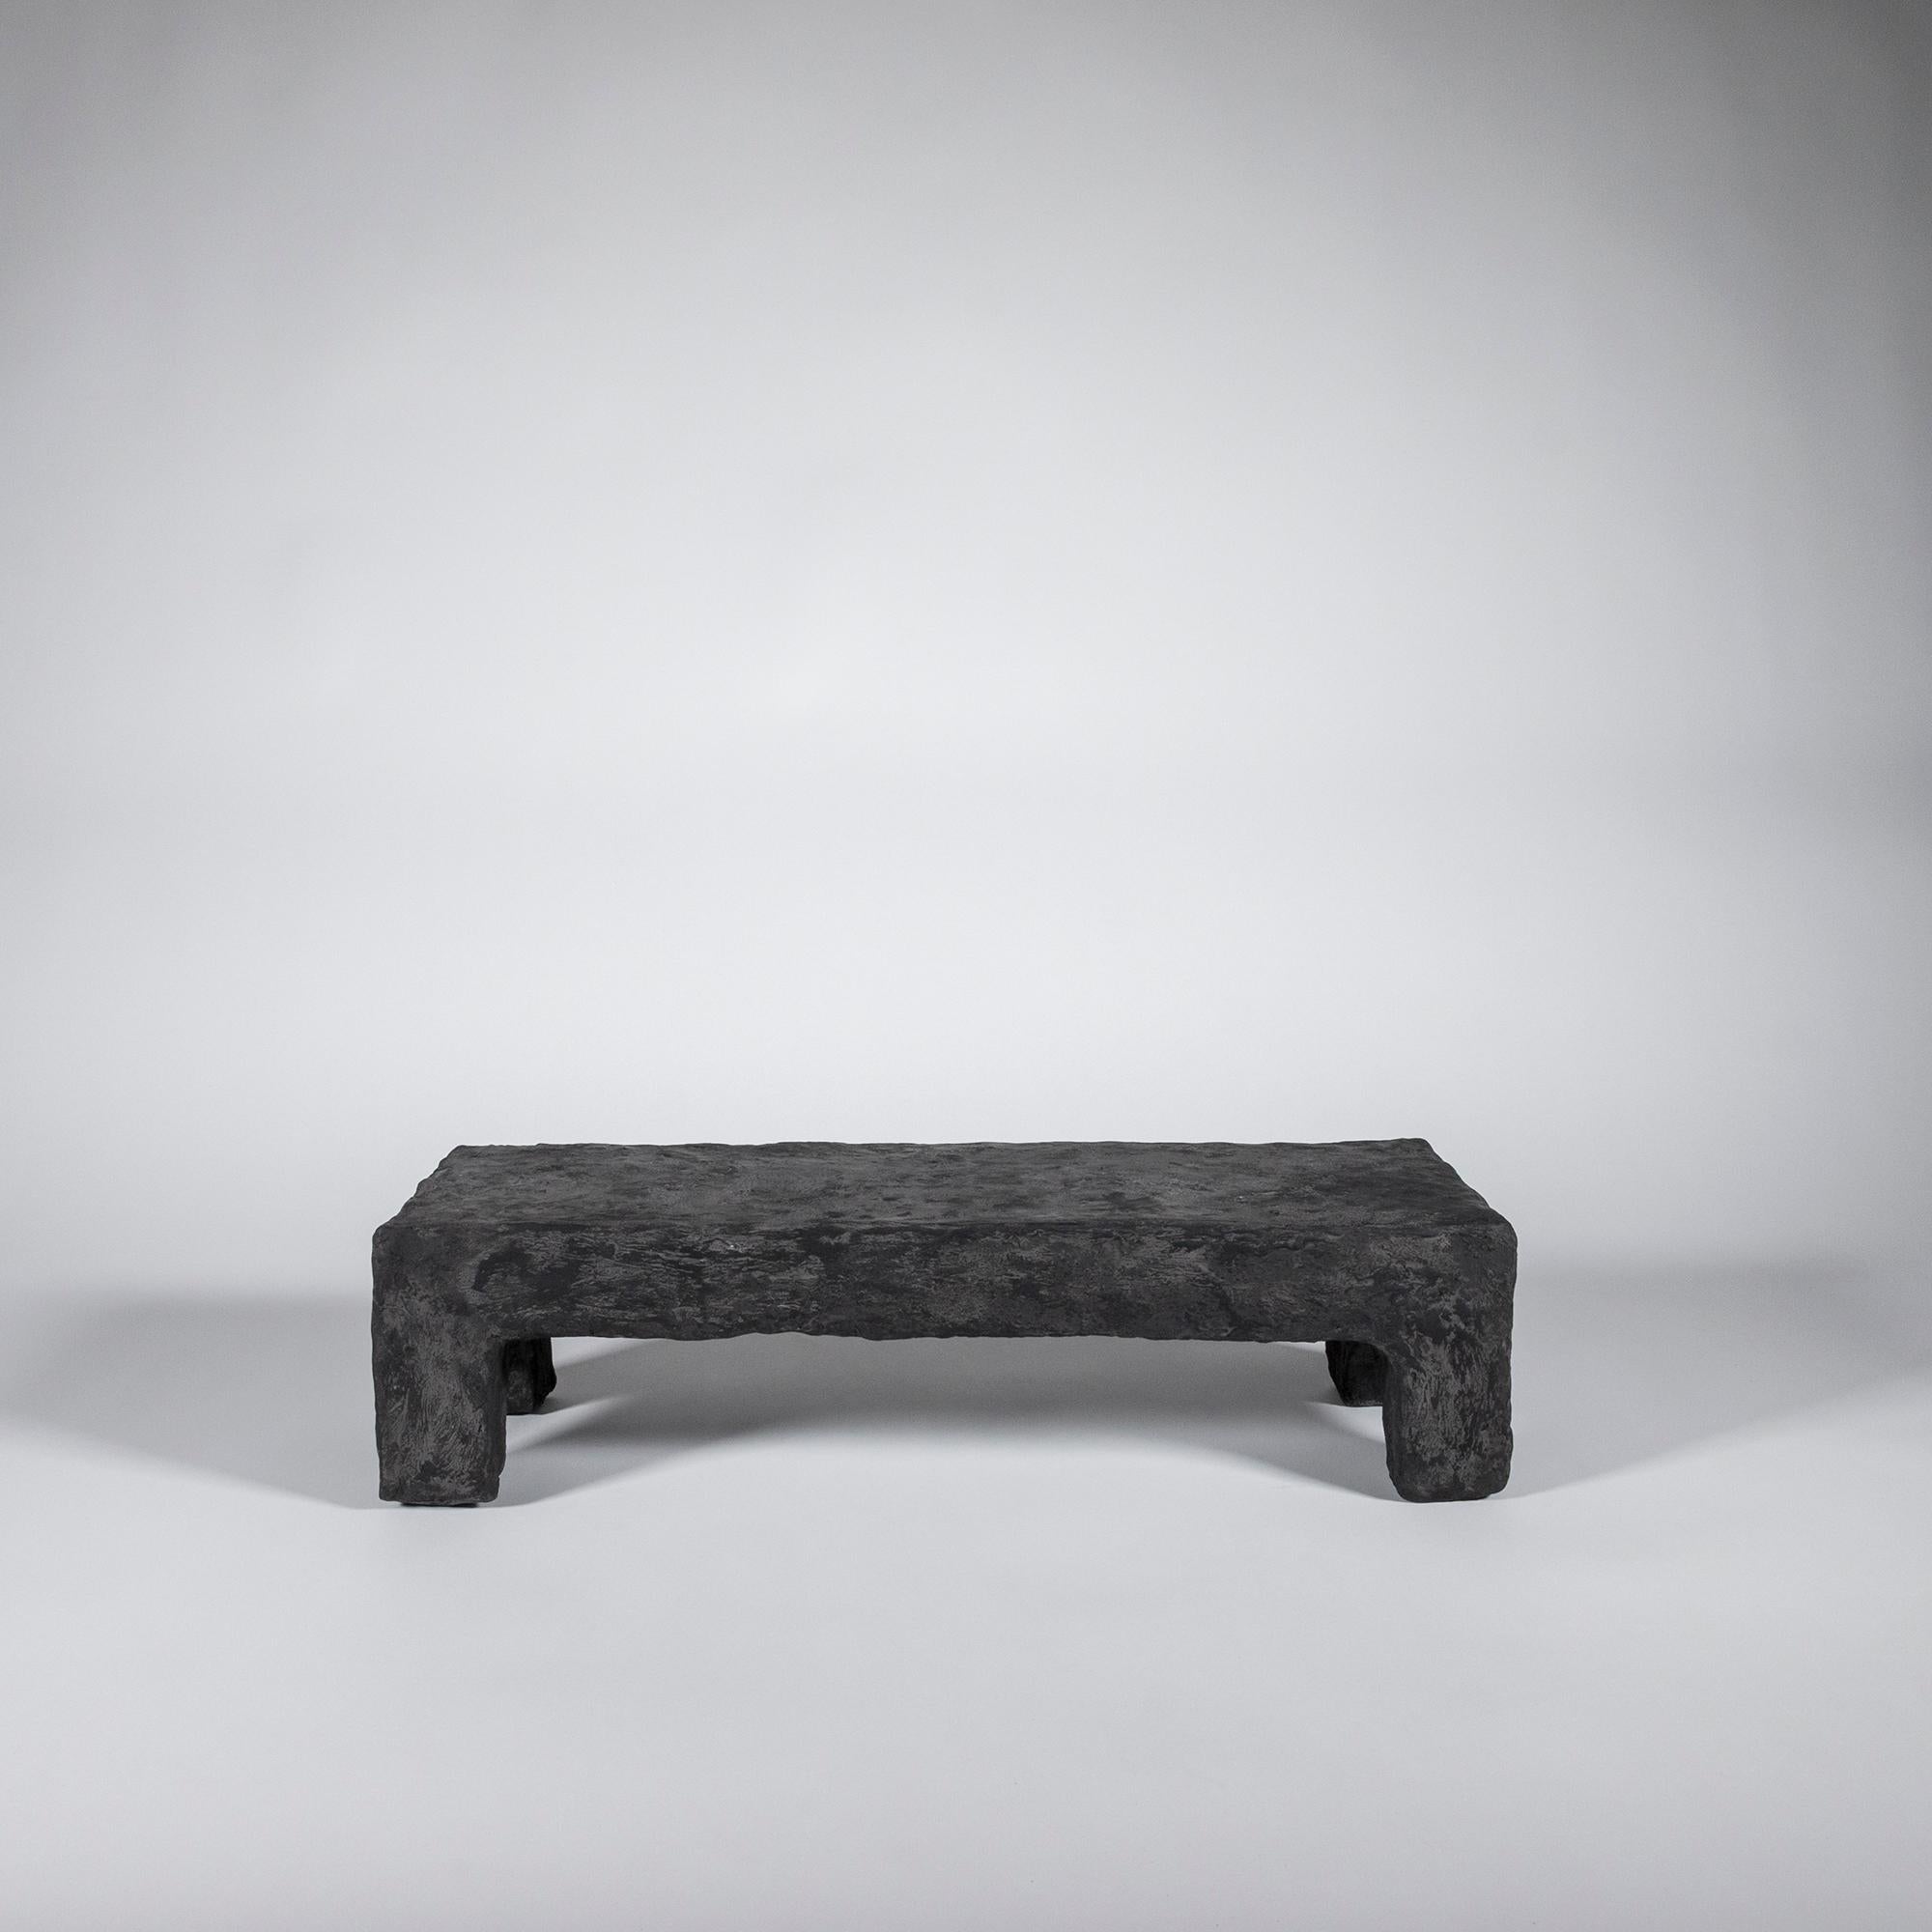 Minimalist Pontis Sculptural Footstool Fruit Stand Serving Tray Laurie Poast Scandinavia For Sale